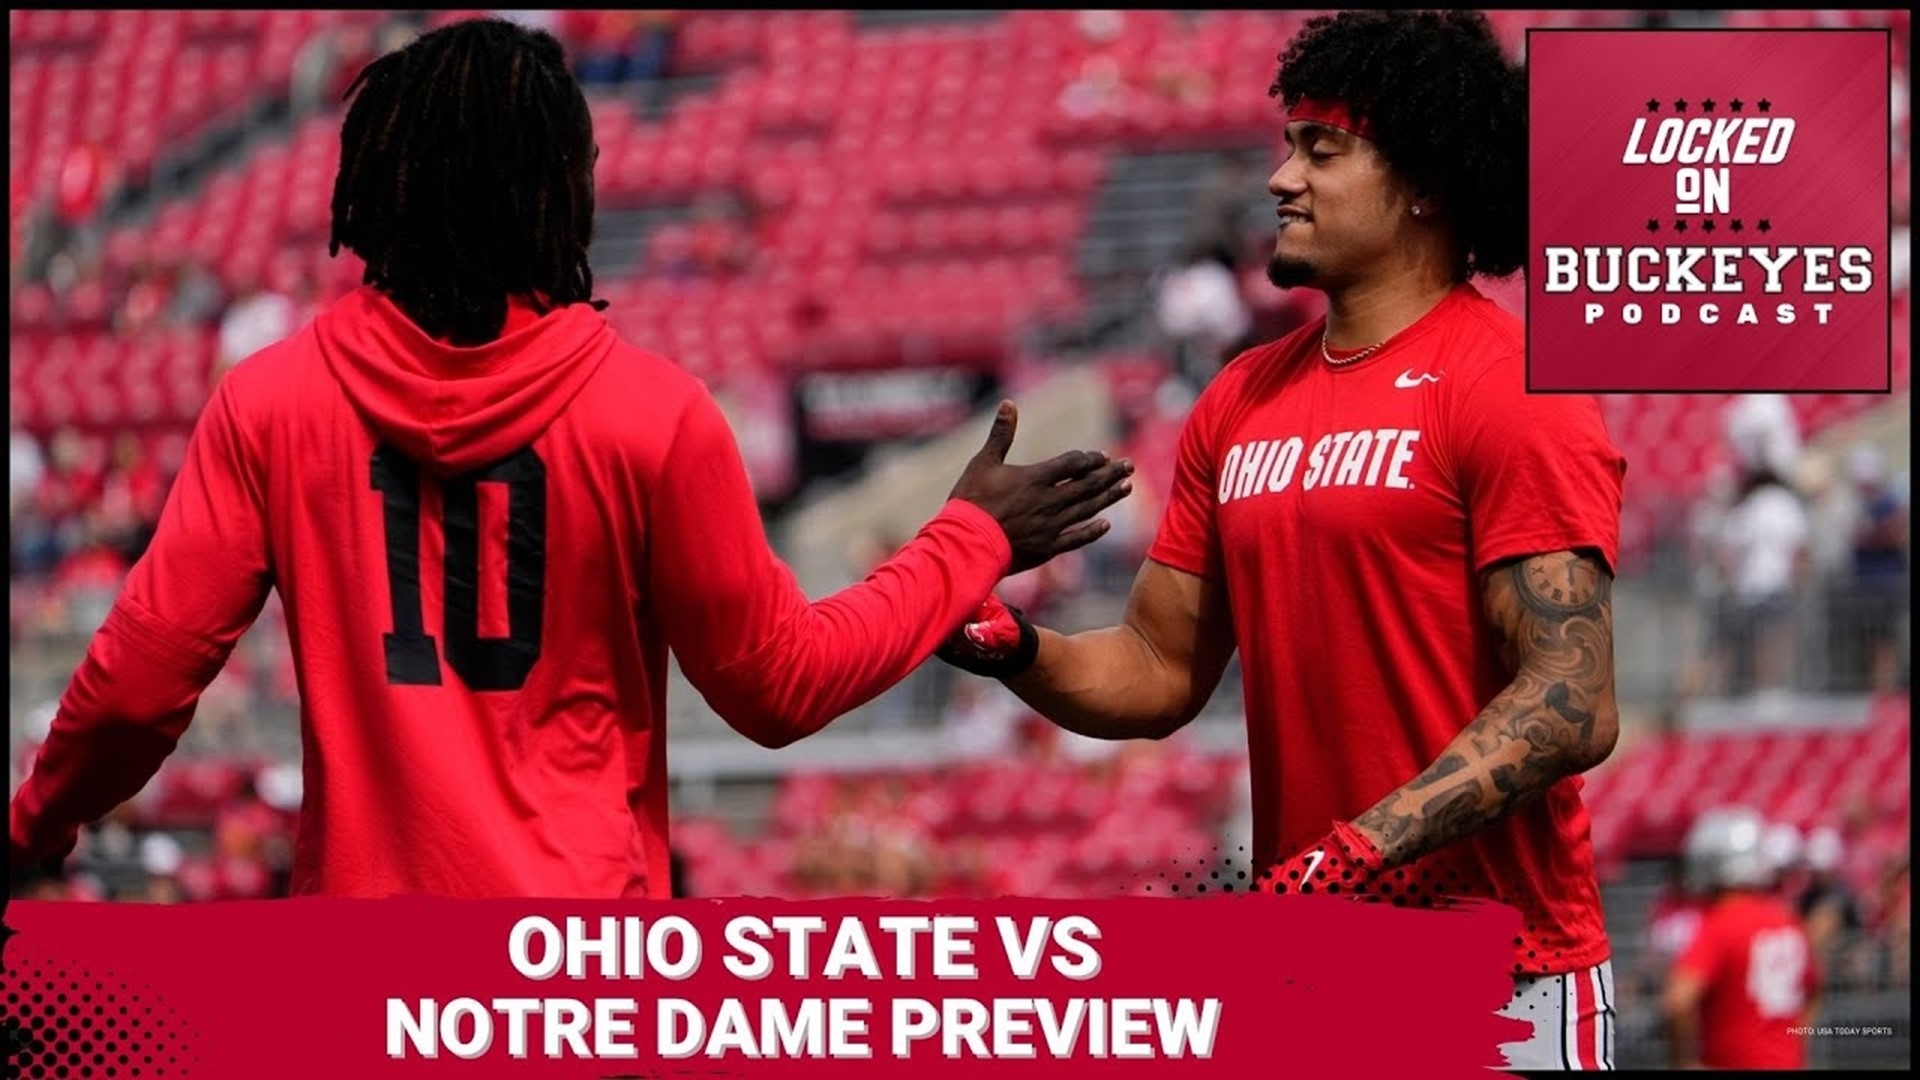 It's almost time for Ohio State and Notre Dame to play for the second time in as many seasons.